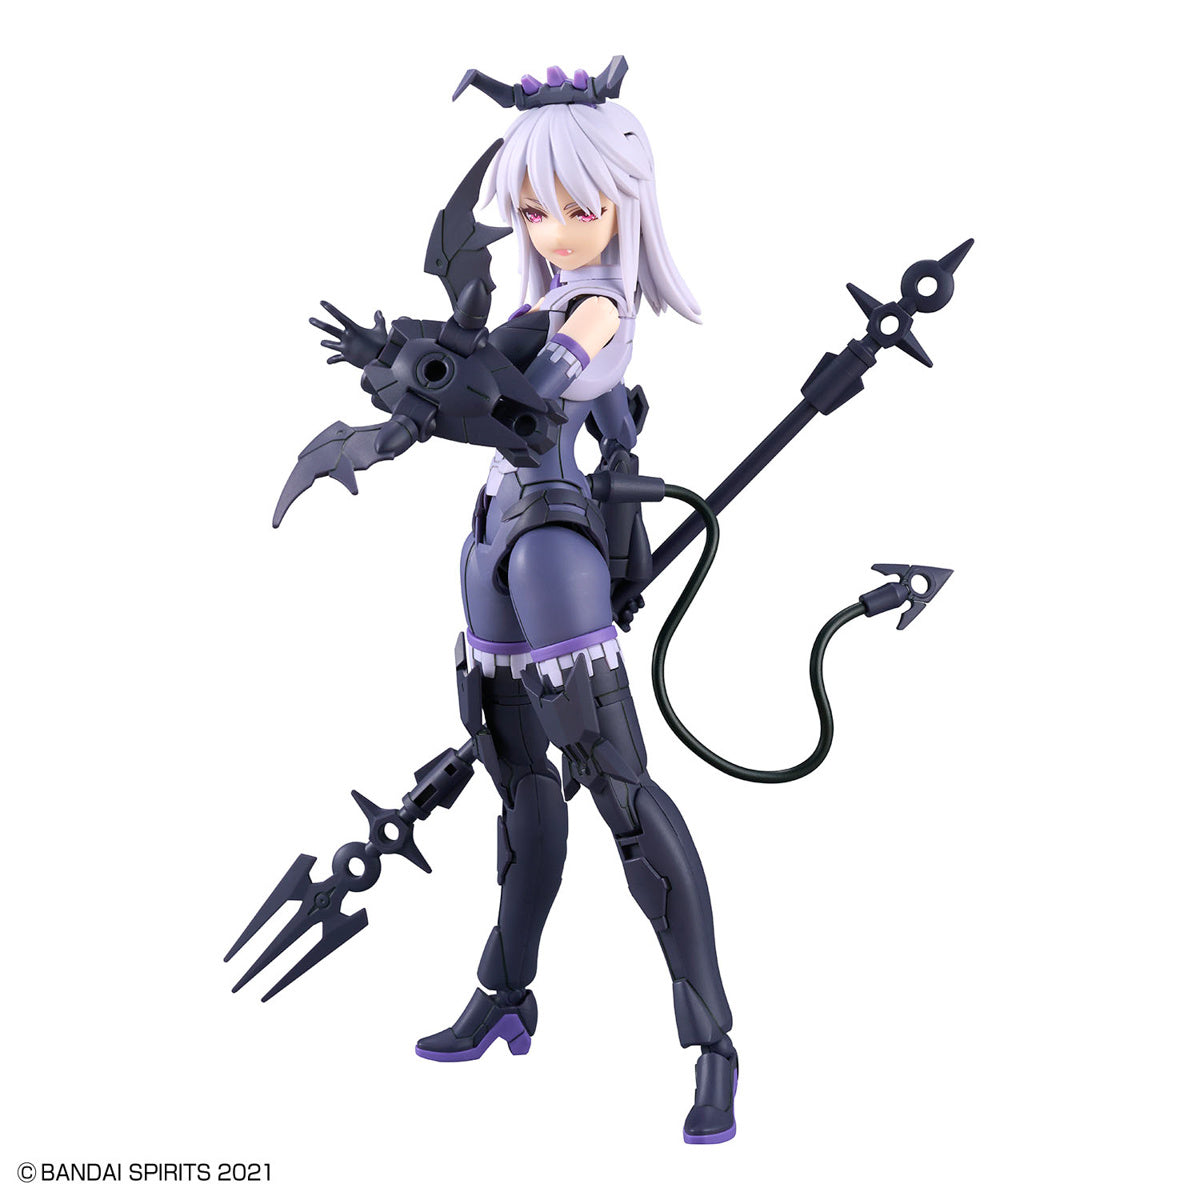 30MS SIS-D00 Neverlia [Color A]-Bandai-Ace Cards & Collectibles